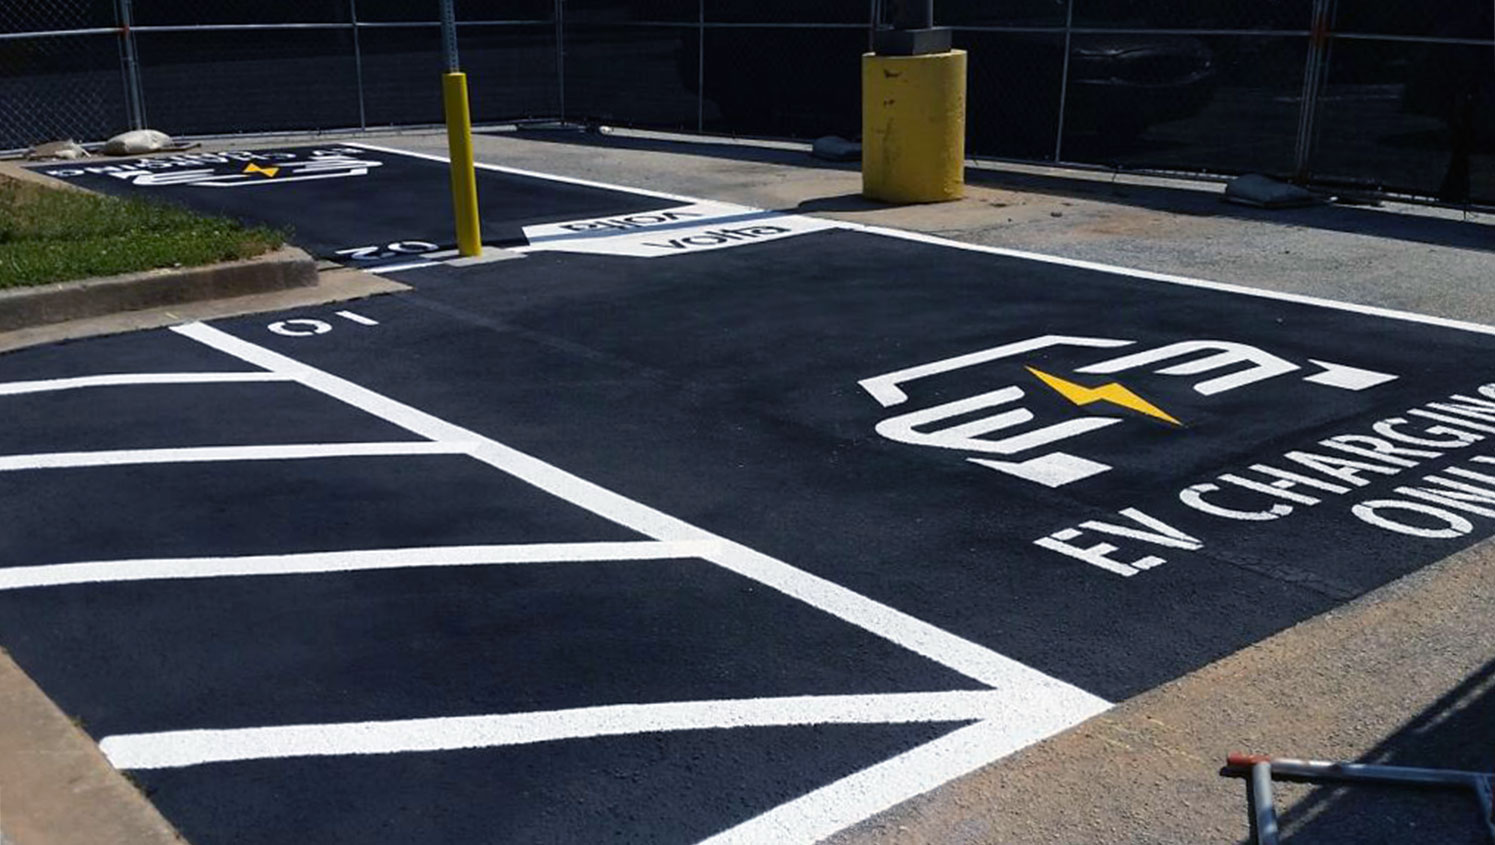 electric vehicle charging only stencils painted in two parking stalls in Atlanta, GA